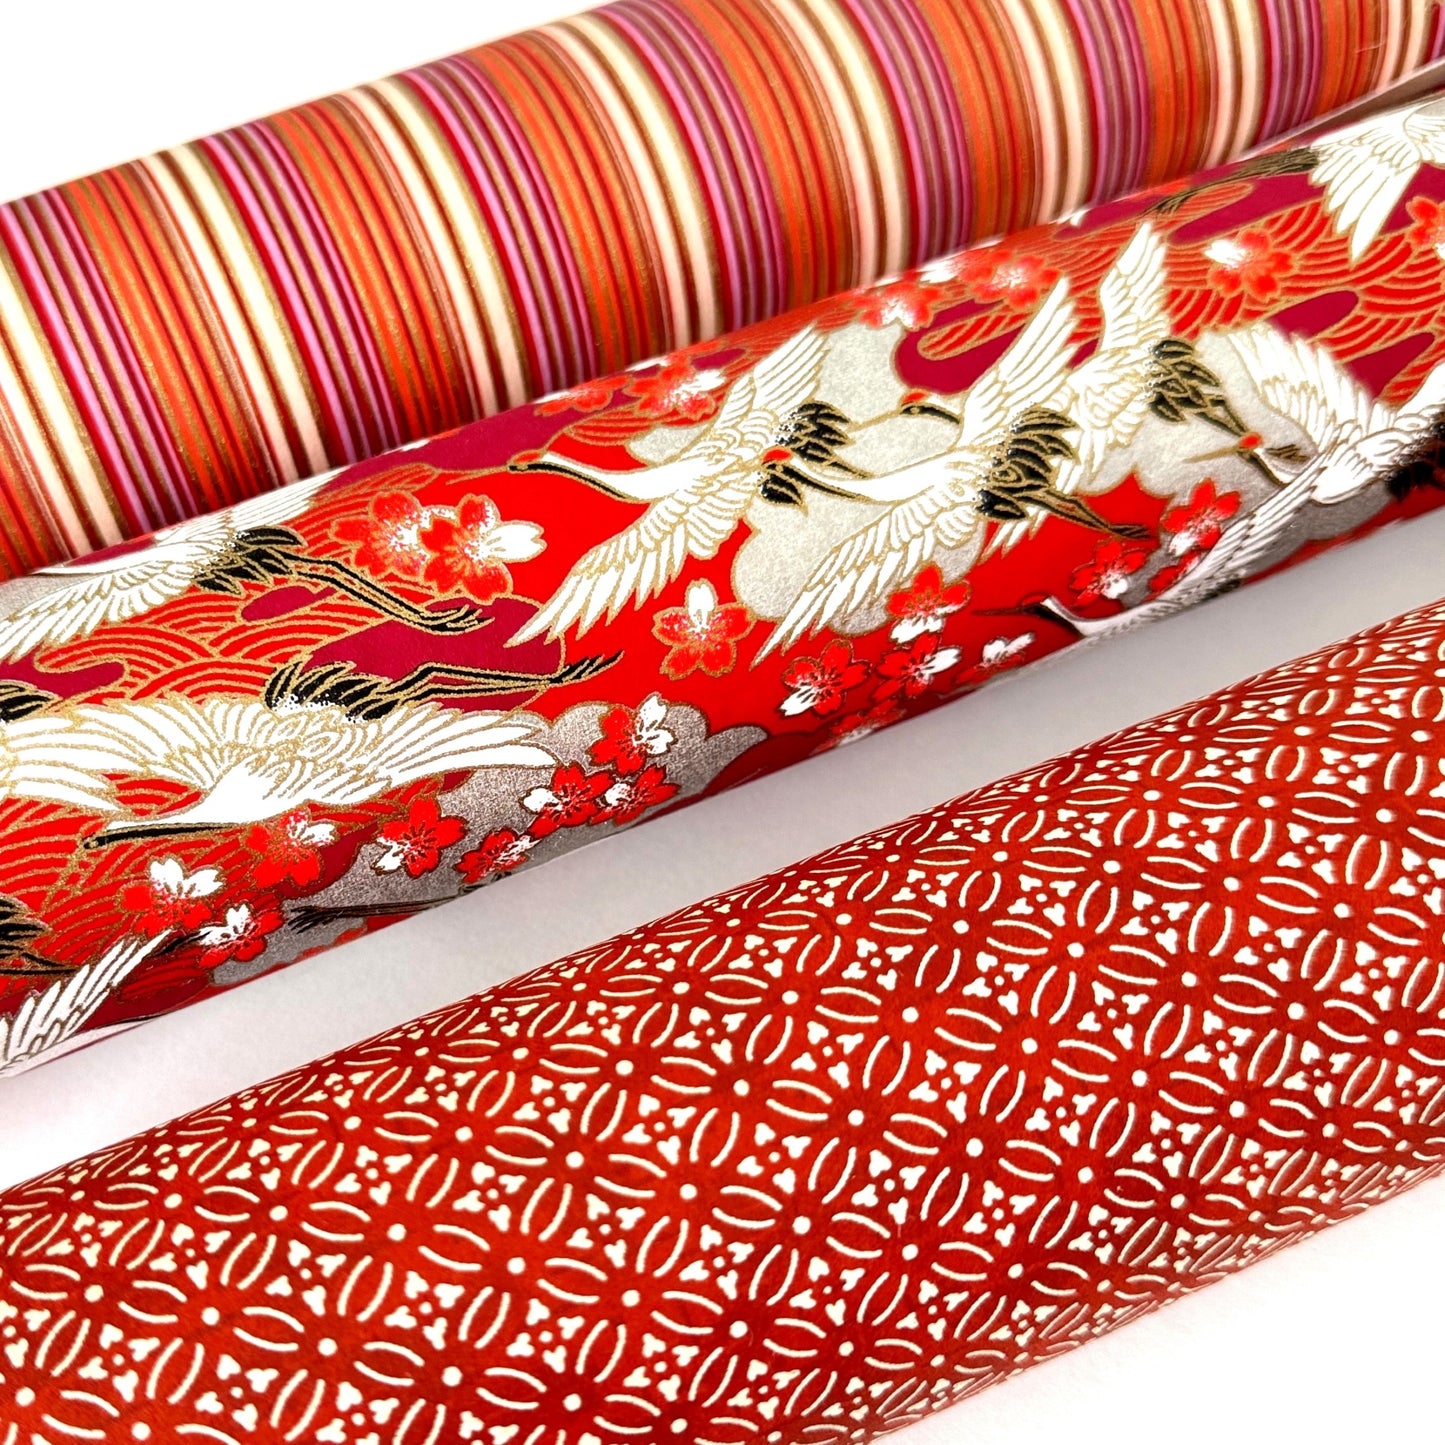 Japanese silkscreen chiyogami paper with a two-tone rich red geometric pattern on creamy white. Pictured rolled with other designs